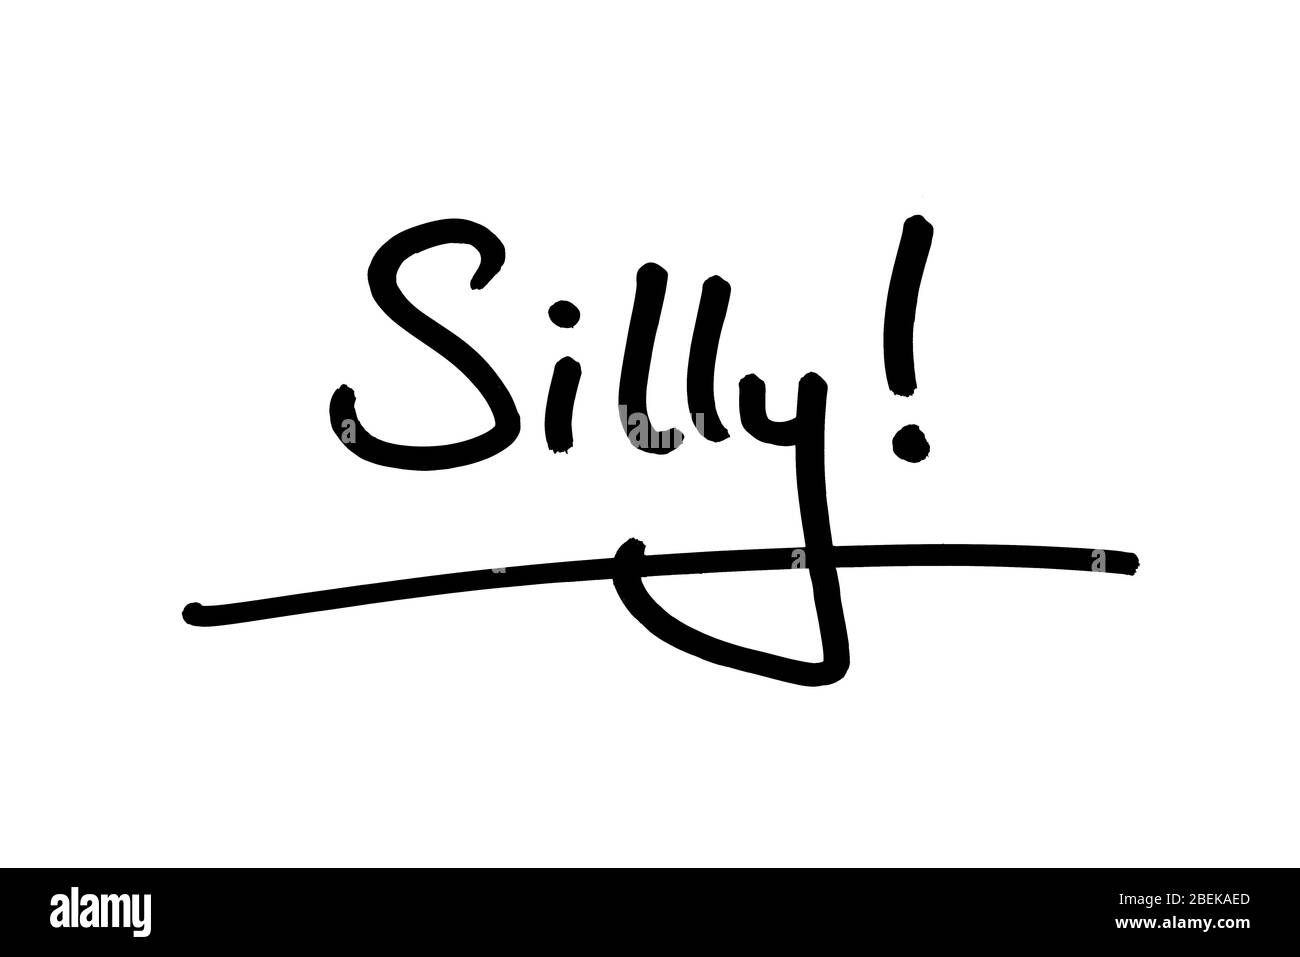 The word Silly! handwritten on a white background. Stock Photo